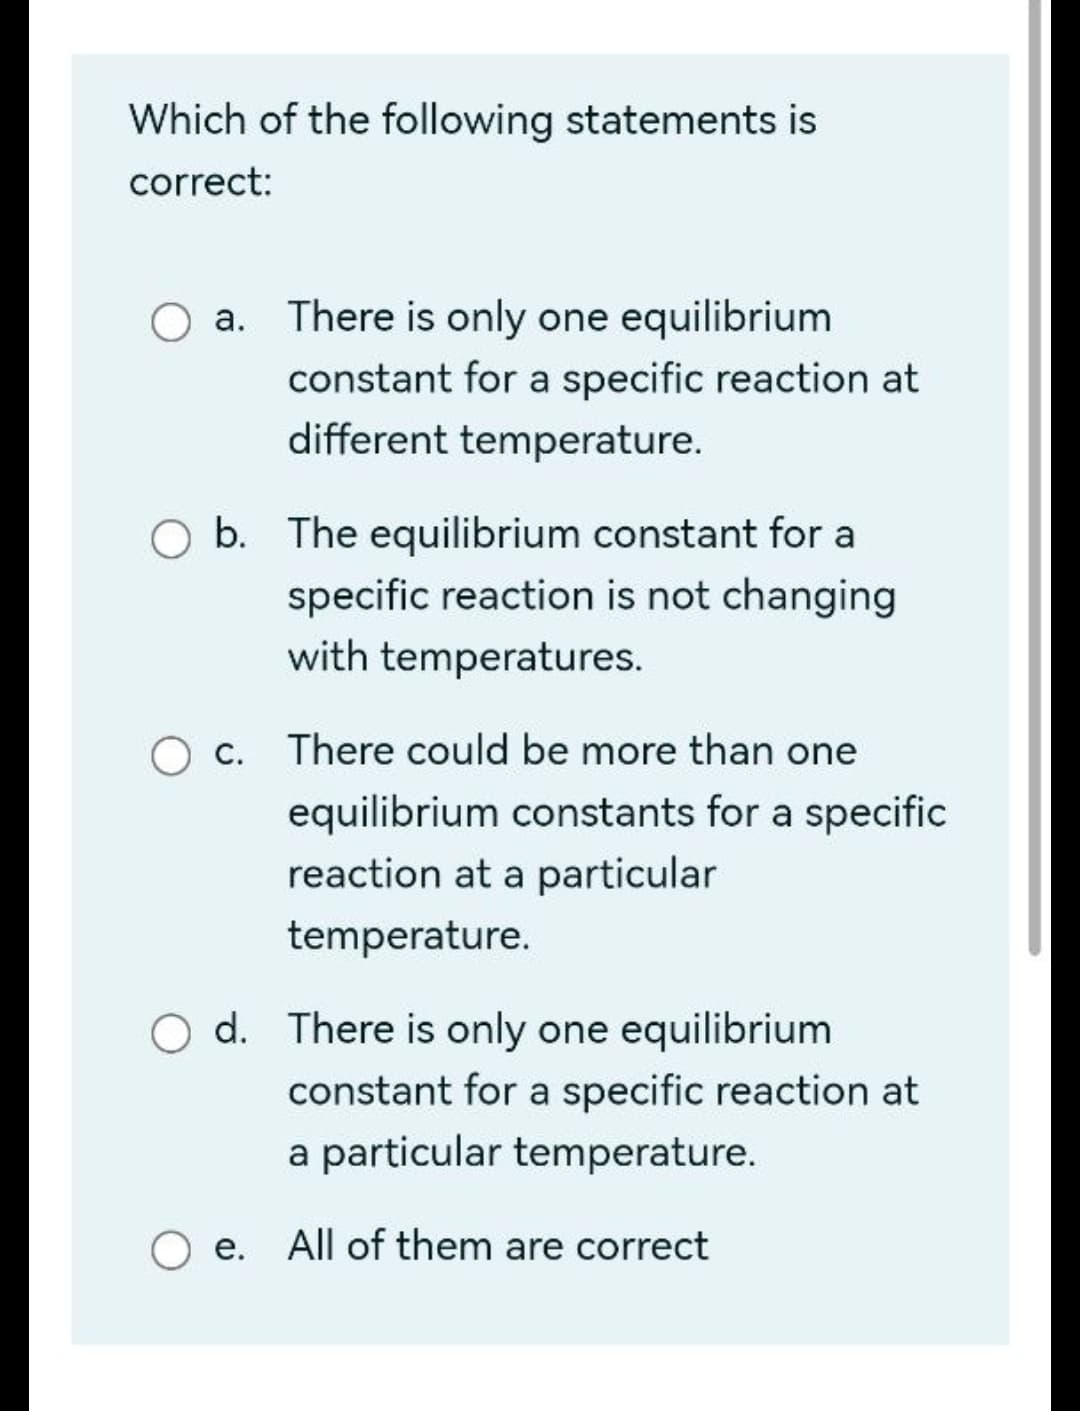 Which of the following statements is
correct:
a. There is only one equilibrium
constant for a specific reaction at
different temperature.
b. The equilibrium constant for a
specific reaction is not changing
with temperatures.
c. There could be more than one
equilibrium constants for a specific
reaction at a particular
temperature.
O d. There is only one equilibrium
constant for a specific reaction at
a particular temperature.
e. All of them are correct
